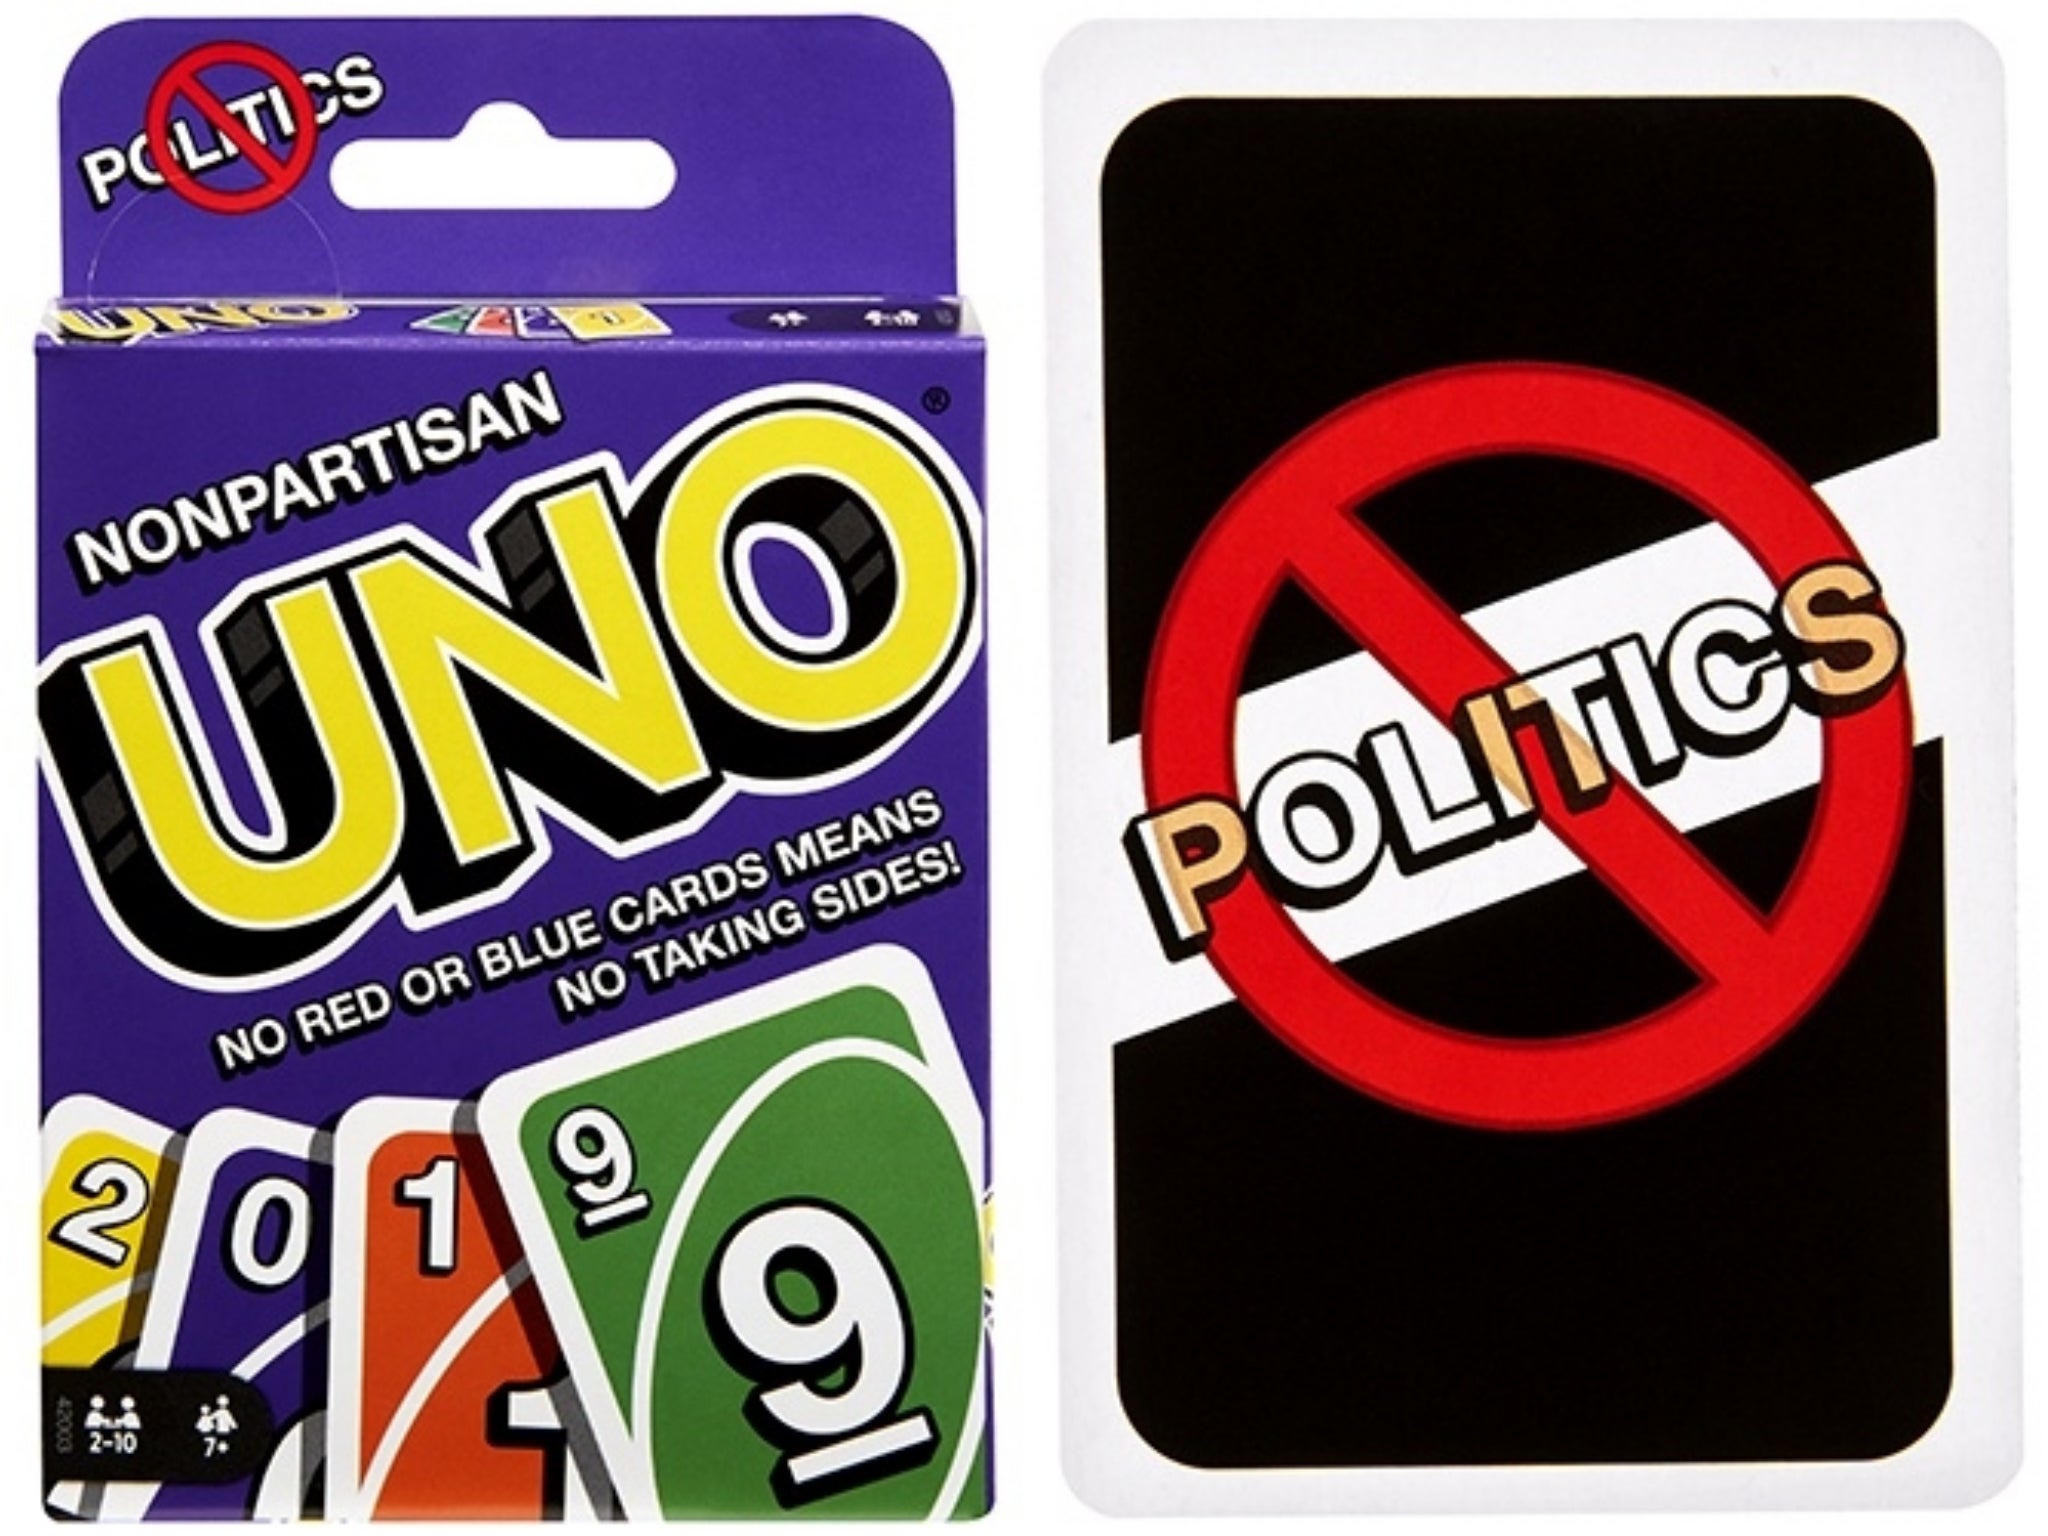 Download uno card game for mobile phones